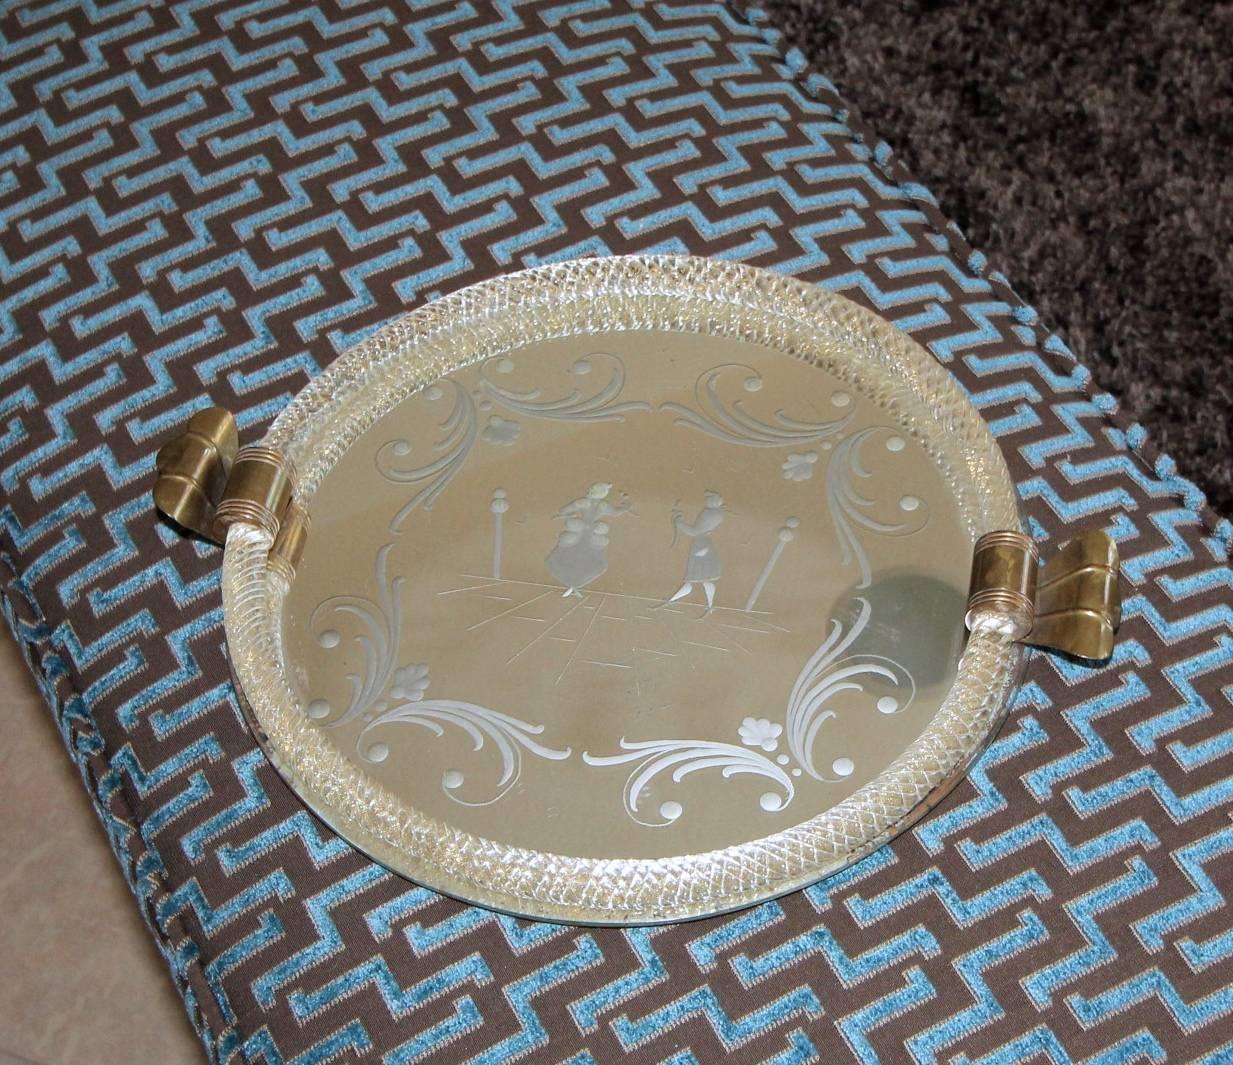 1940s Murano glass vanity tray etched on the reverse with a courting scene, textured glass rail with gold inclusions and brass patinated handles. Size of tray 12.5